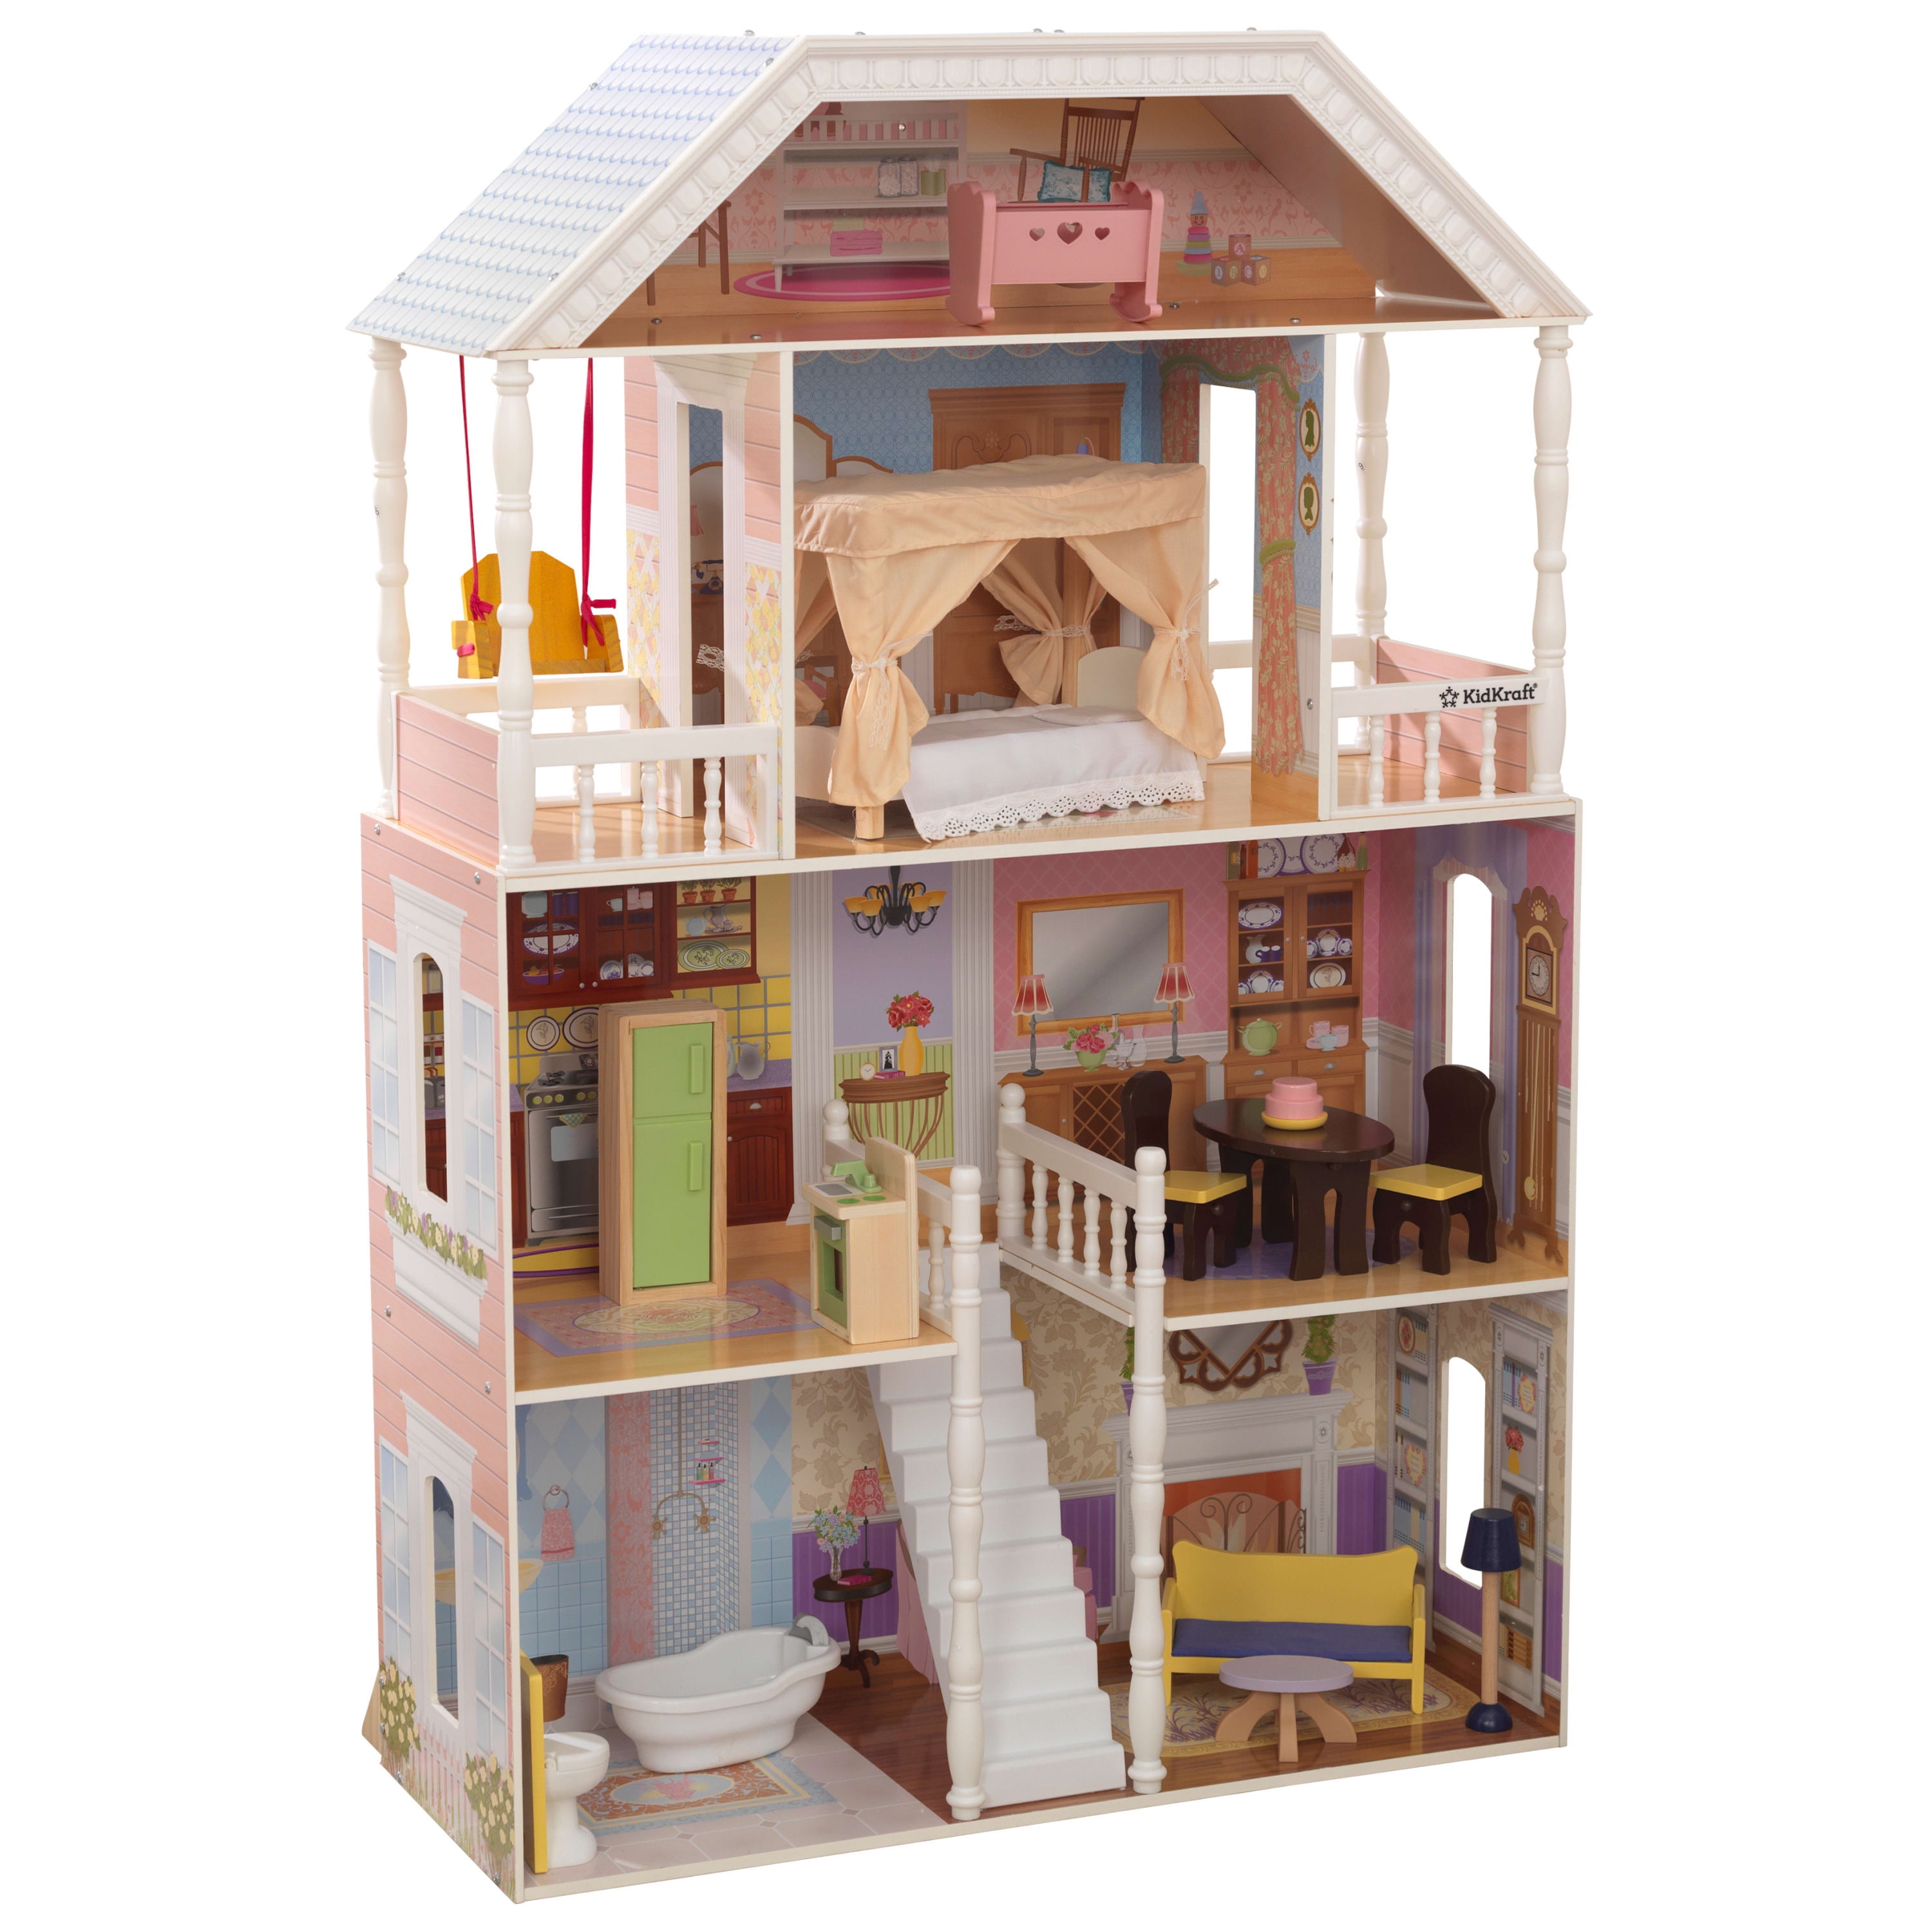 KidKraft Savannah Wooden Dollhouse With Porch Swing And 14 Accessories Ages 3 And Up 58cdaaa6 F5c2 4daf Be9e C6637755a537.0de54b1de9ed68ba0c4c5f84c3d8a753 